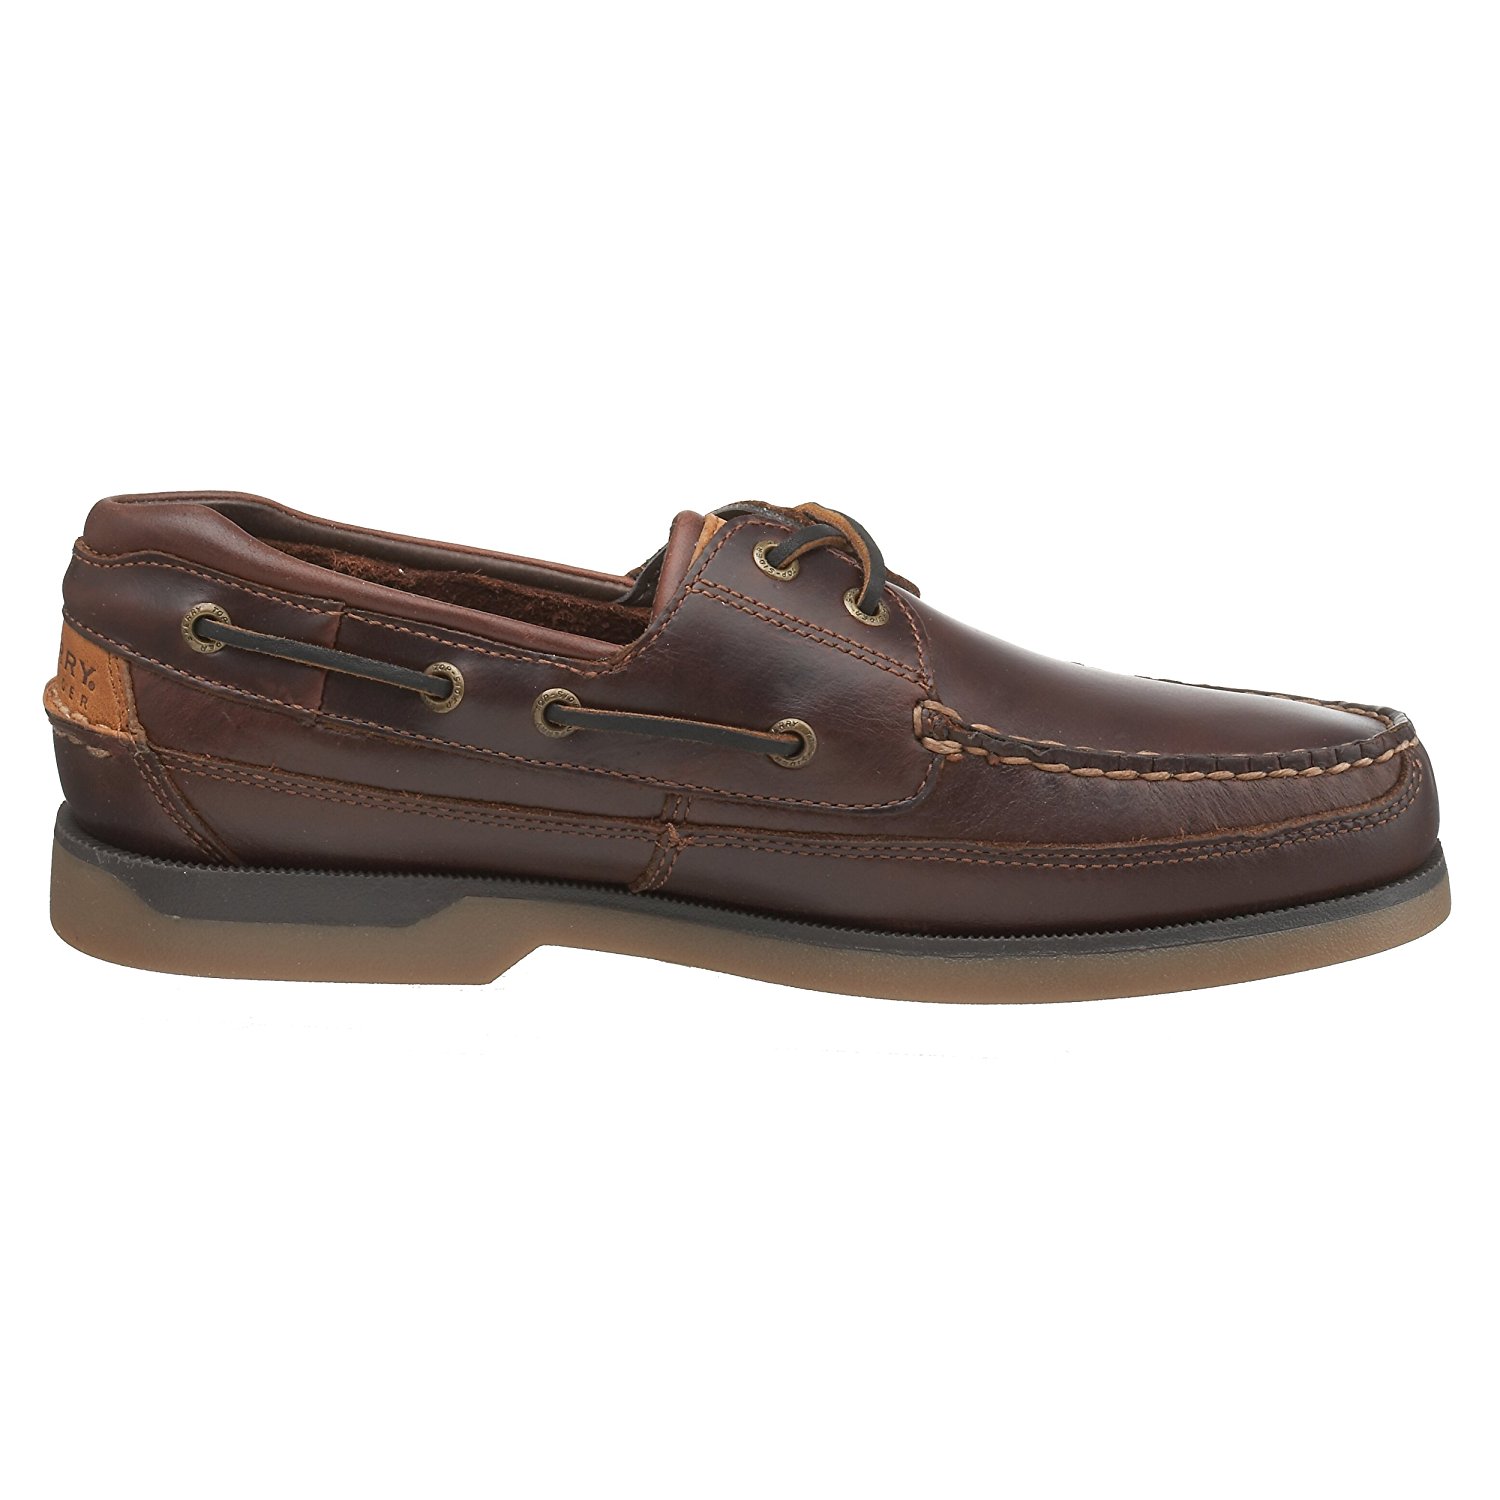 Sperry Top-Sider Men's Mako 2-Eye Canoe Moc Lace-Up, Amaretto, Size 10. ...